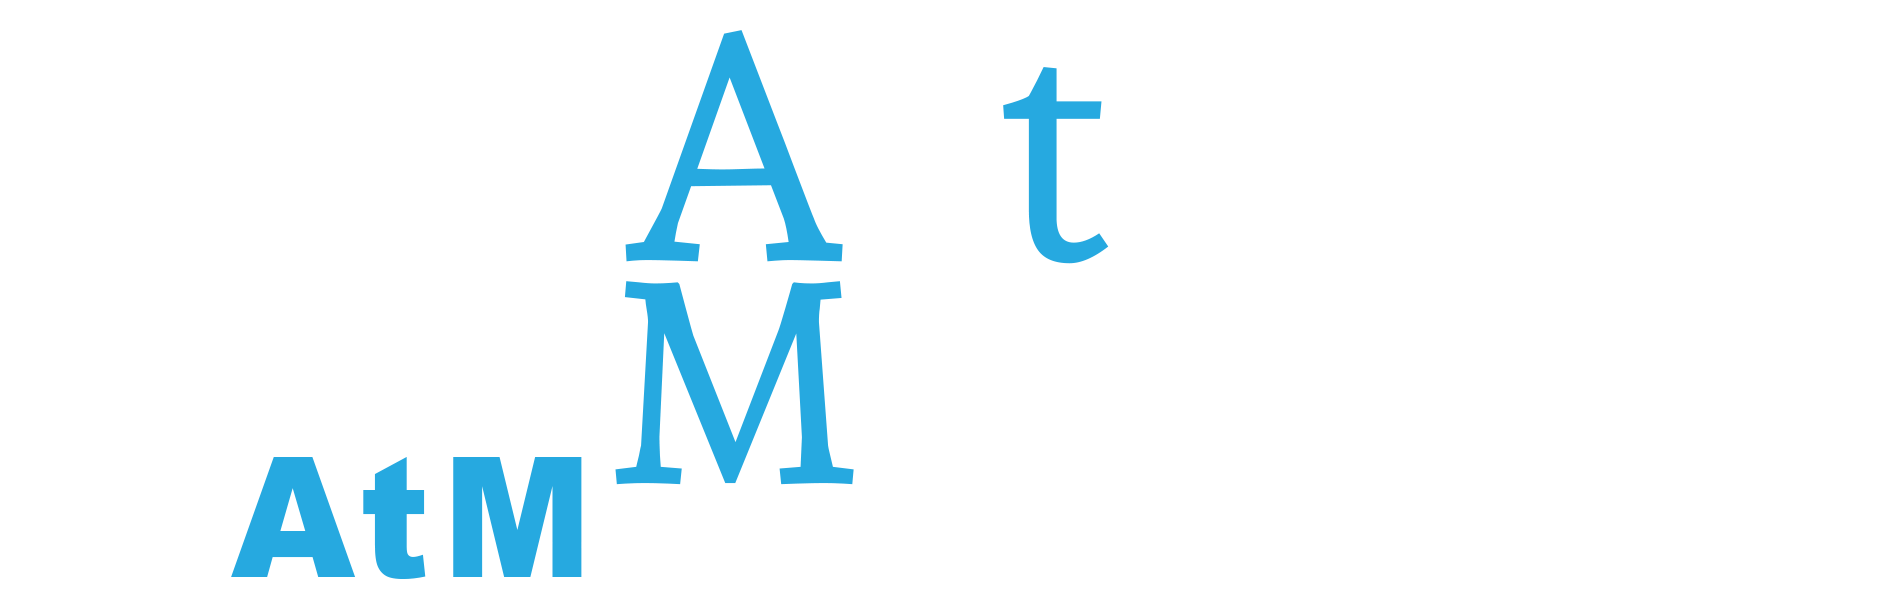 Leverage Your Reviews by AcTuated Marketing™